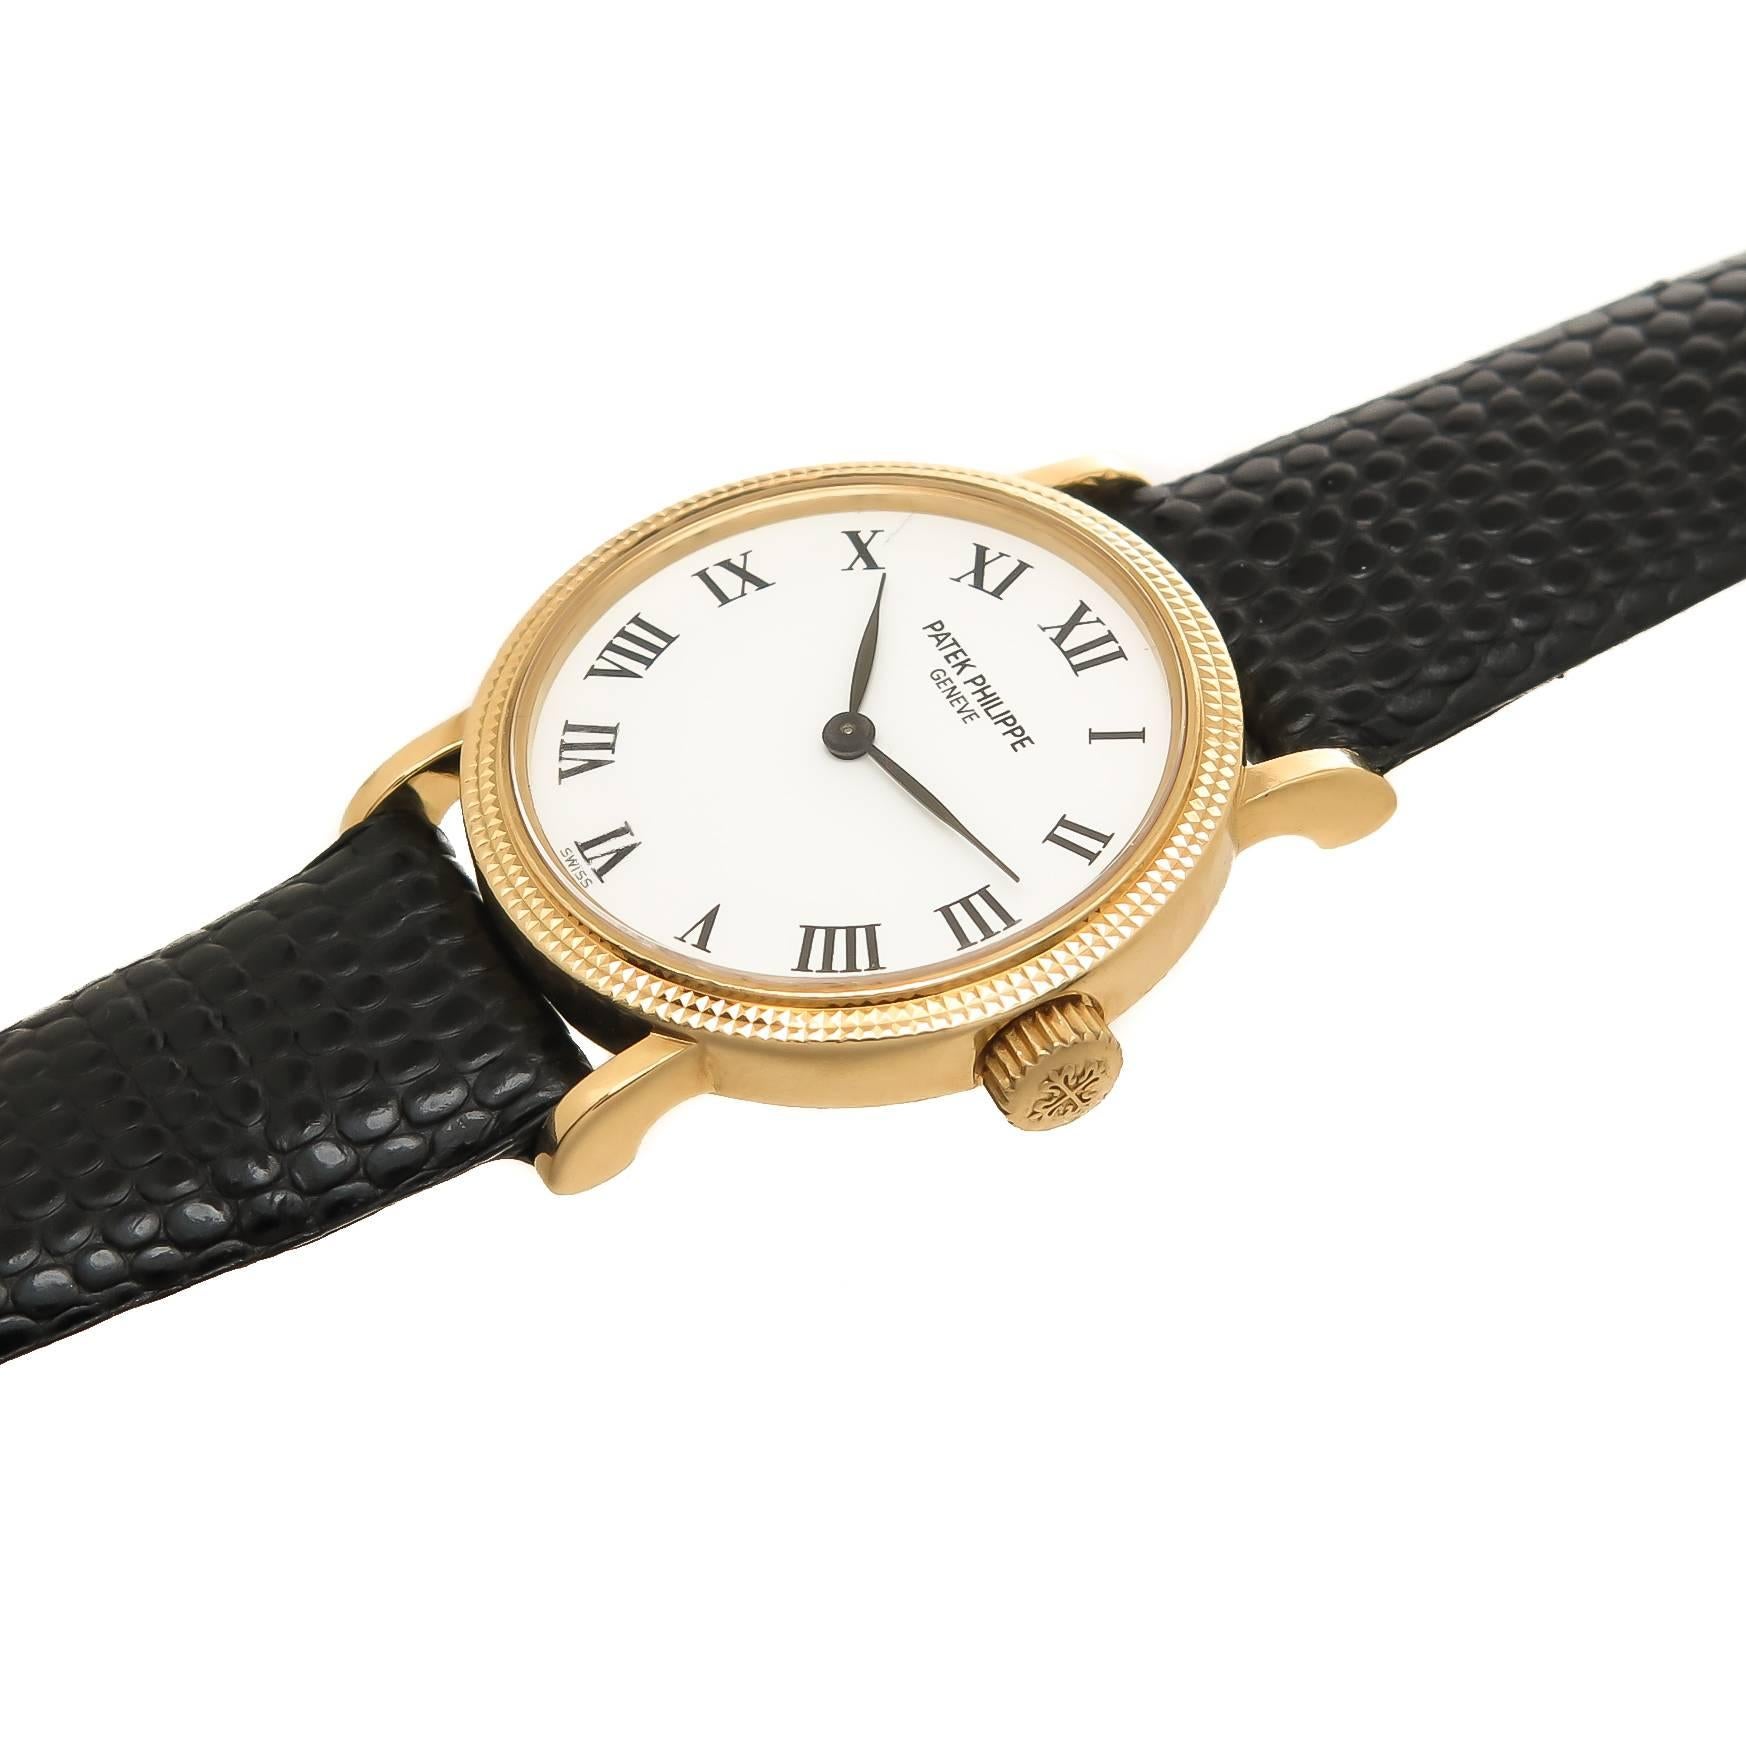 Circa 2000 Patek Philippe Reference 4819 18K Yellow Gold 25 MM Ladies Wrist Watch with Hobnail Bezel. Caliber E15 Quartz Movement, White Dial with Black Roman Numerals. New Black Lizard Strap. Comes in original Patek Philippe Box. An excellent